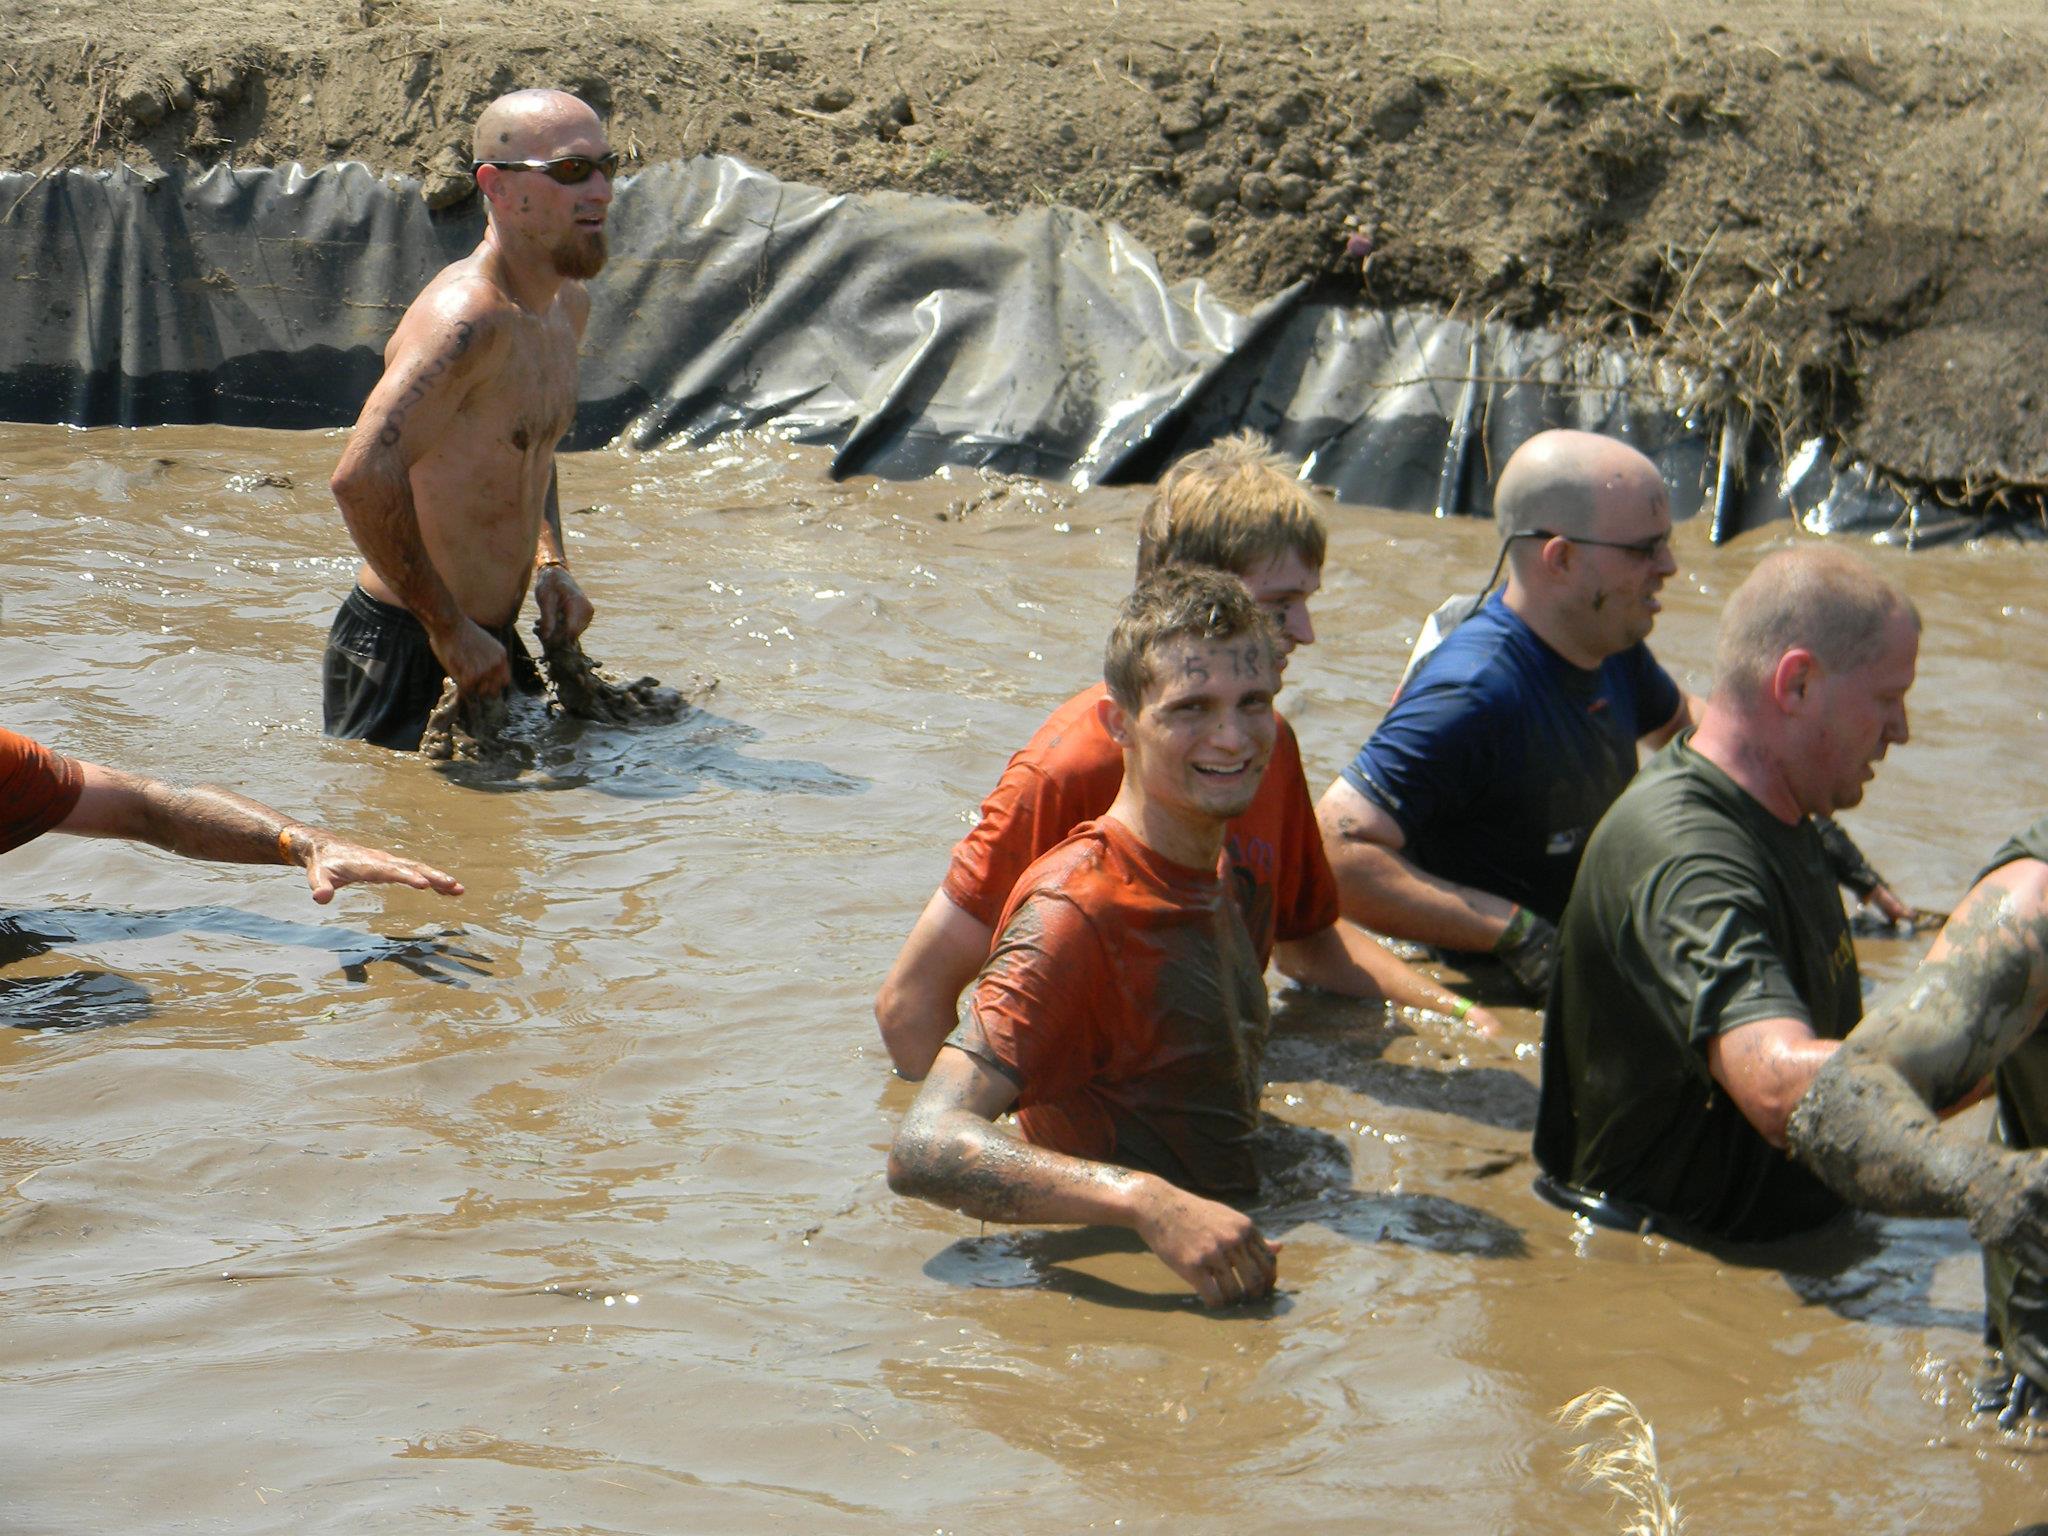 racers in muddy water obstacle